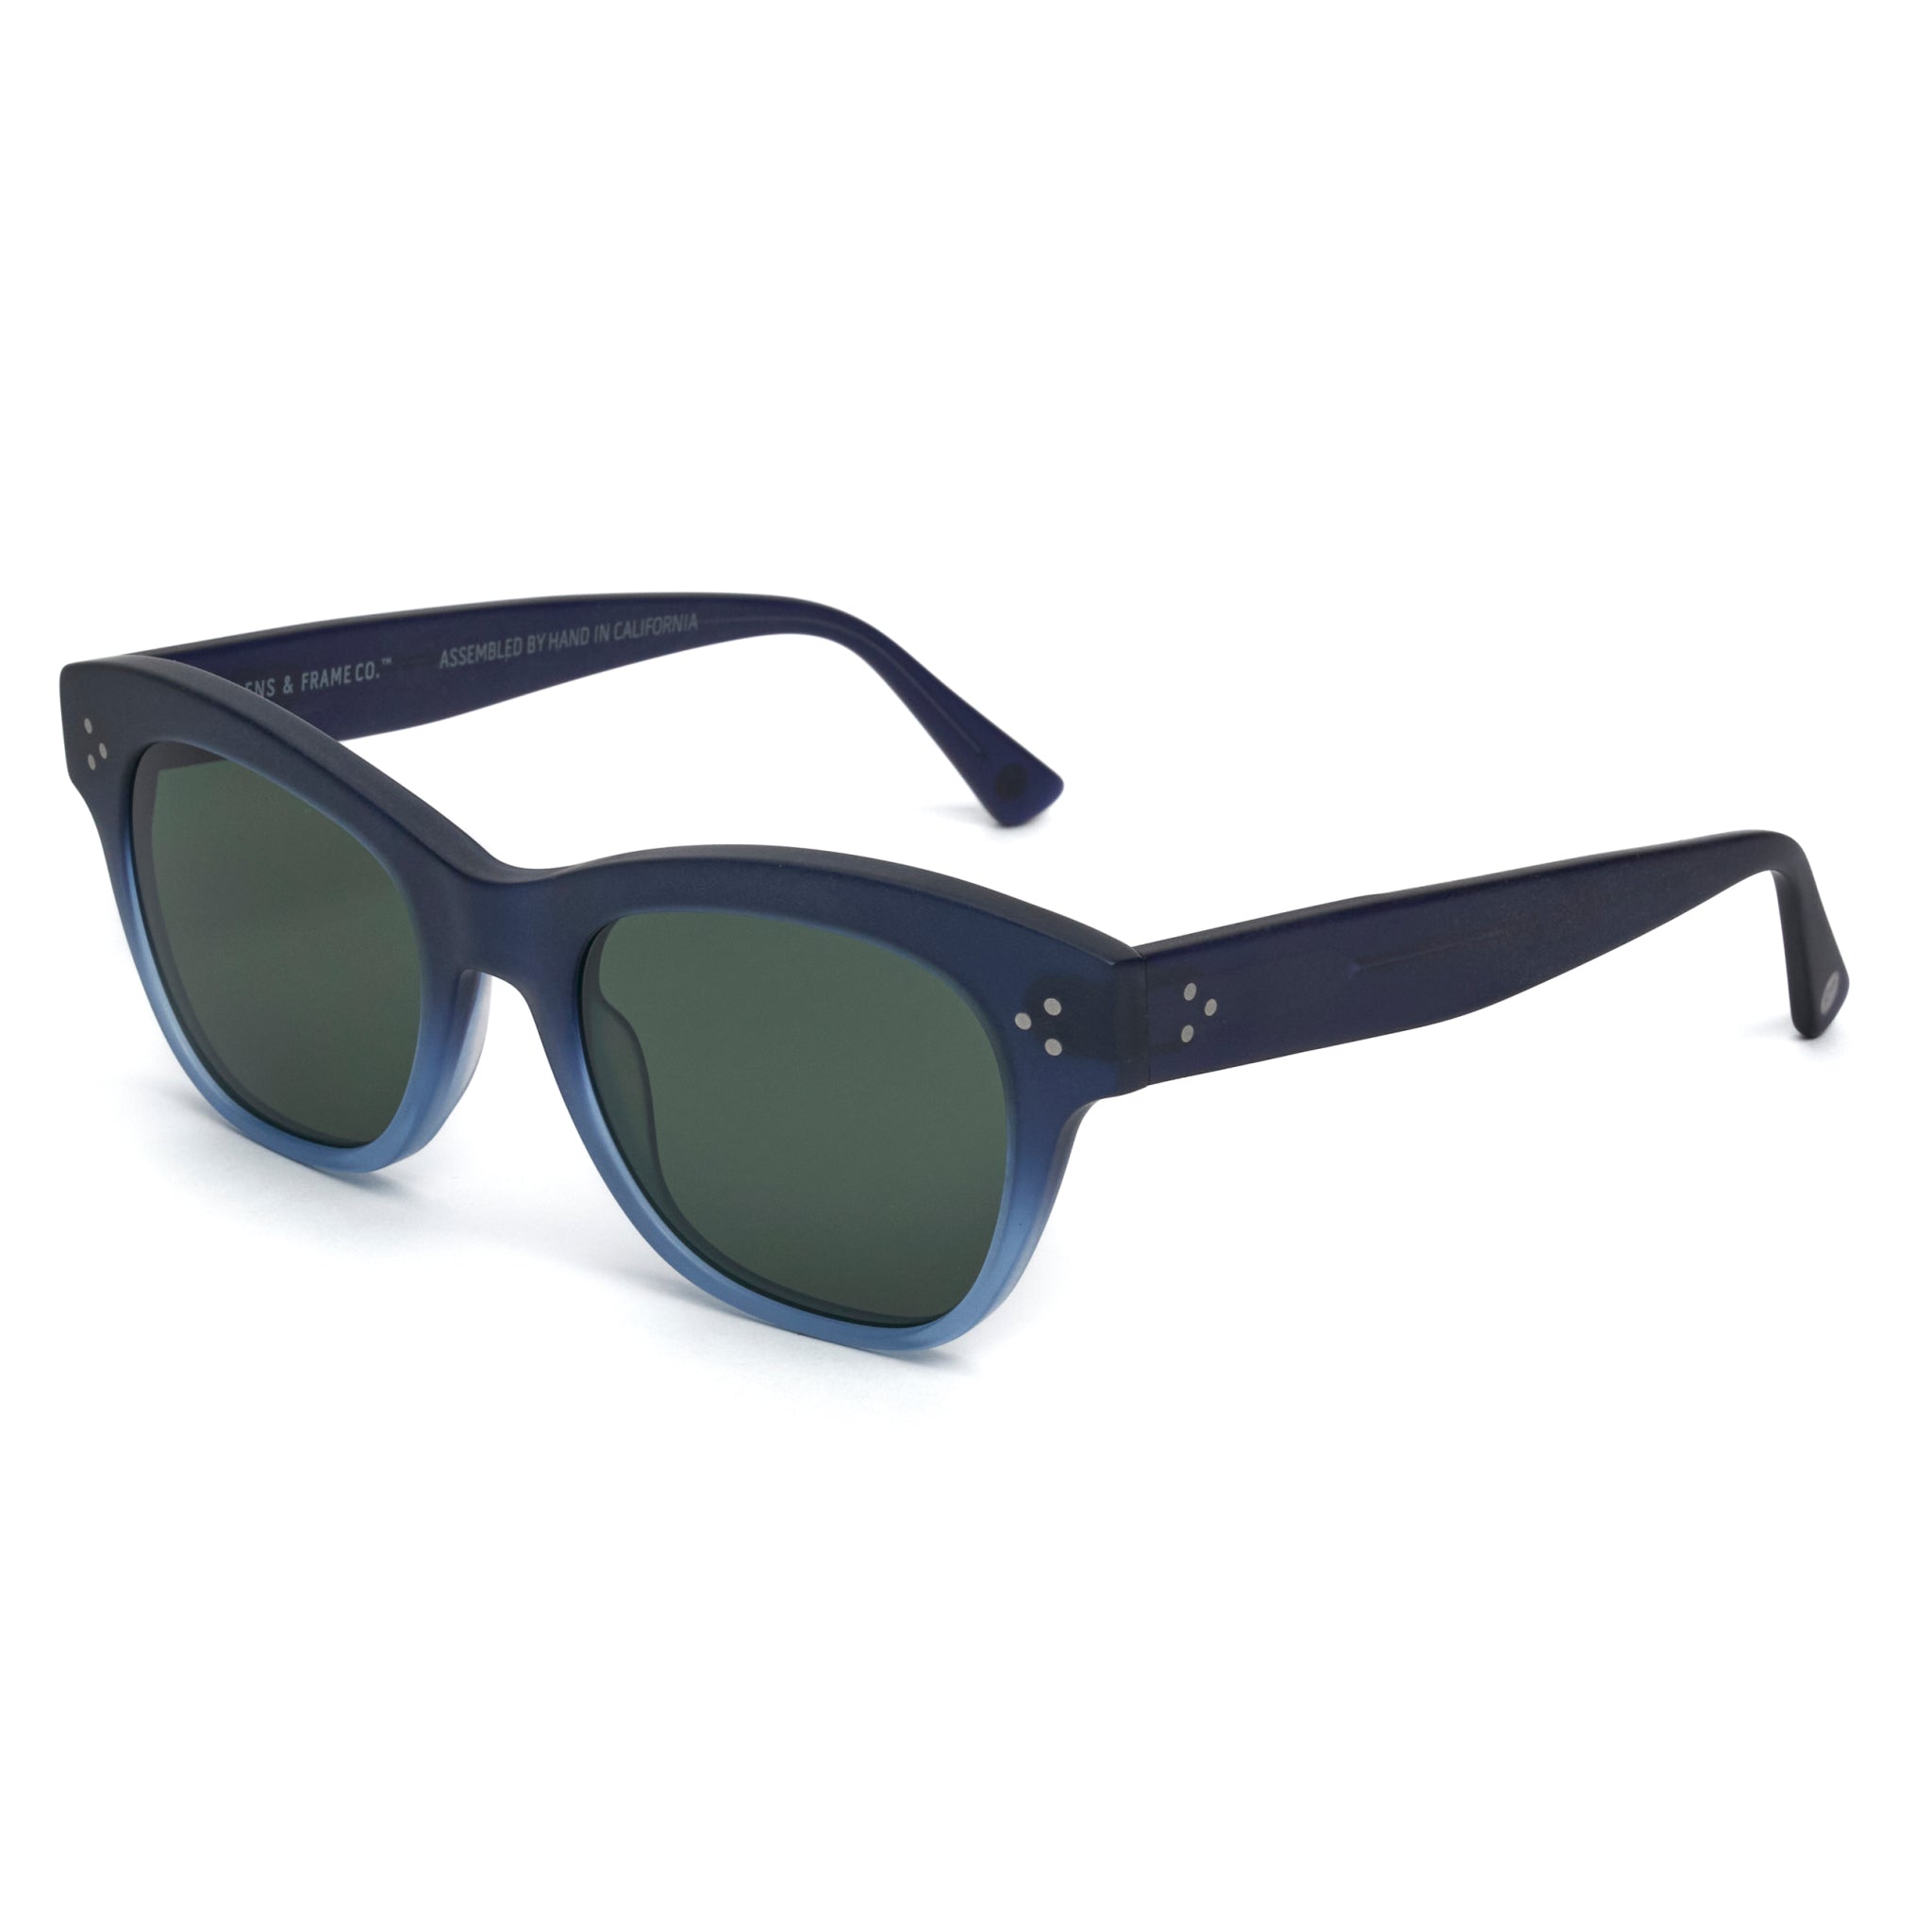 The Iris | Sunglasses by Ûs the Movement (Made in Italy) – UsTheMovement